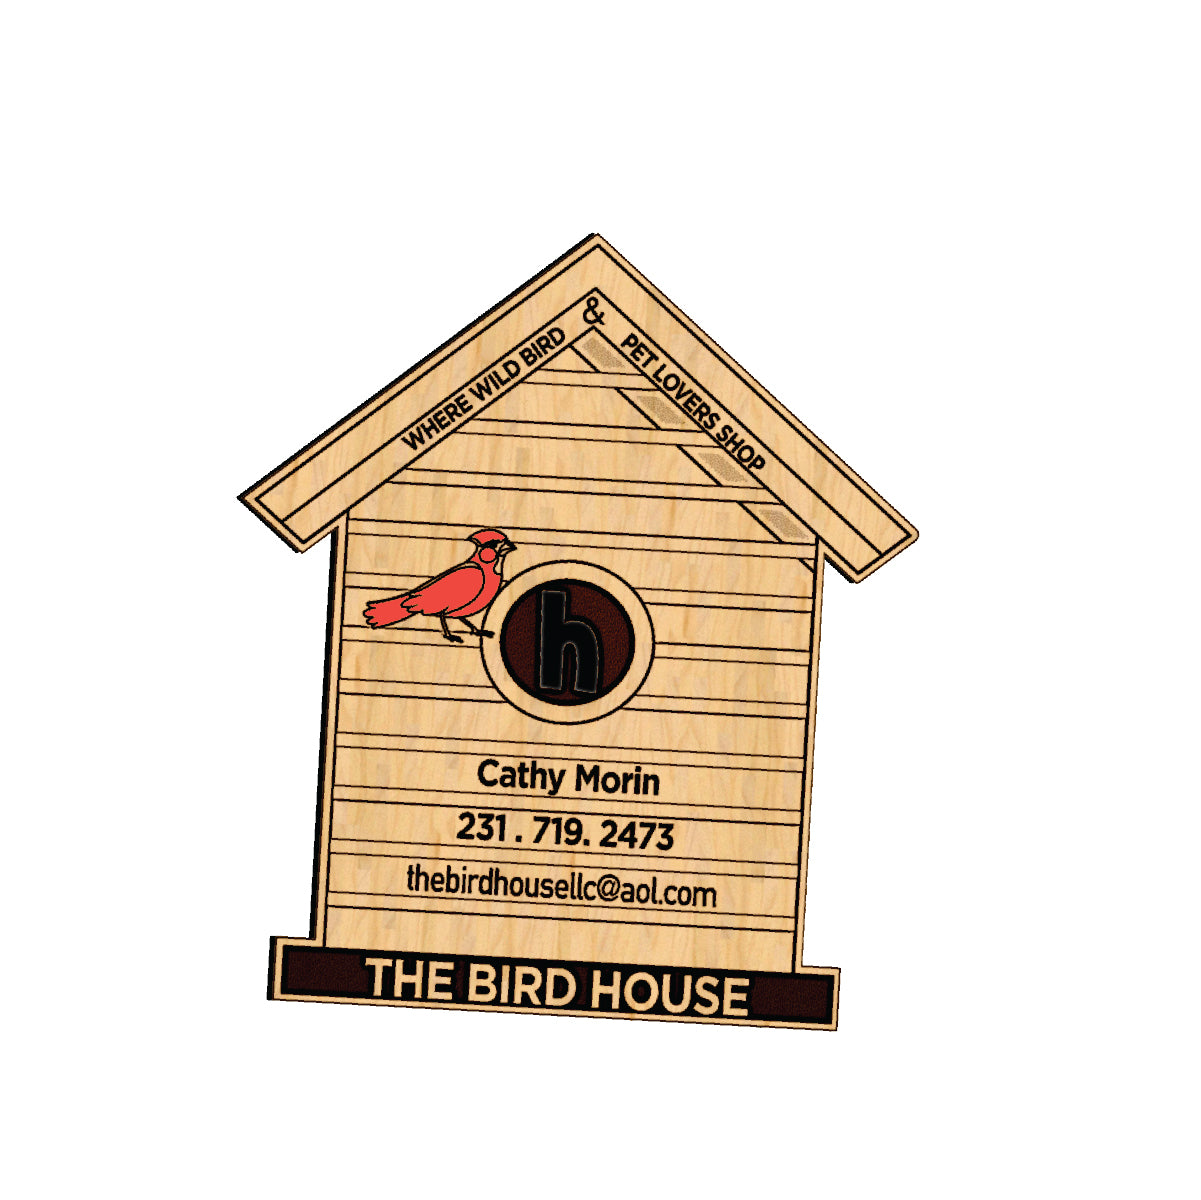 Bird House Custom Fridge Magnet,Set of 10 Cut to Shape Business Logo Business Cards with Magnet Personalized with Business Information Logo